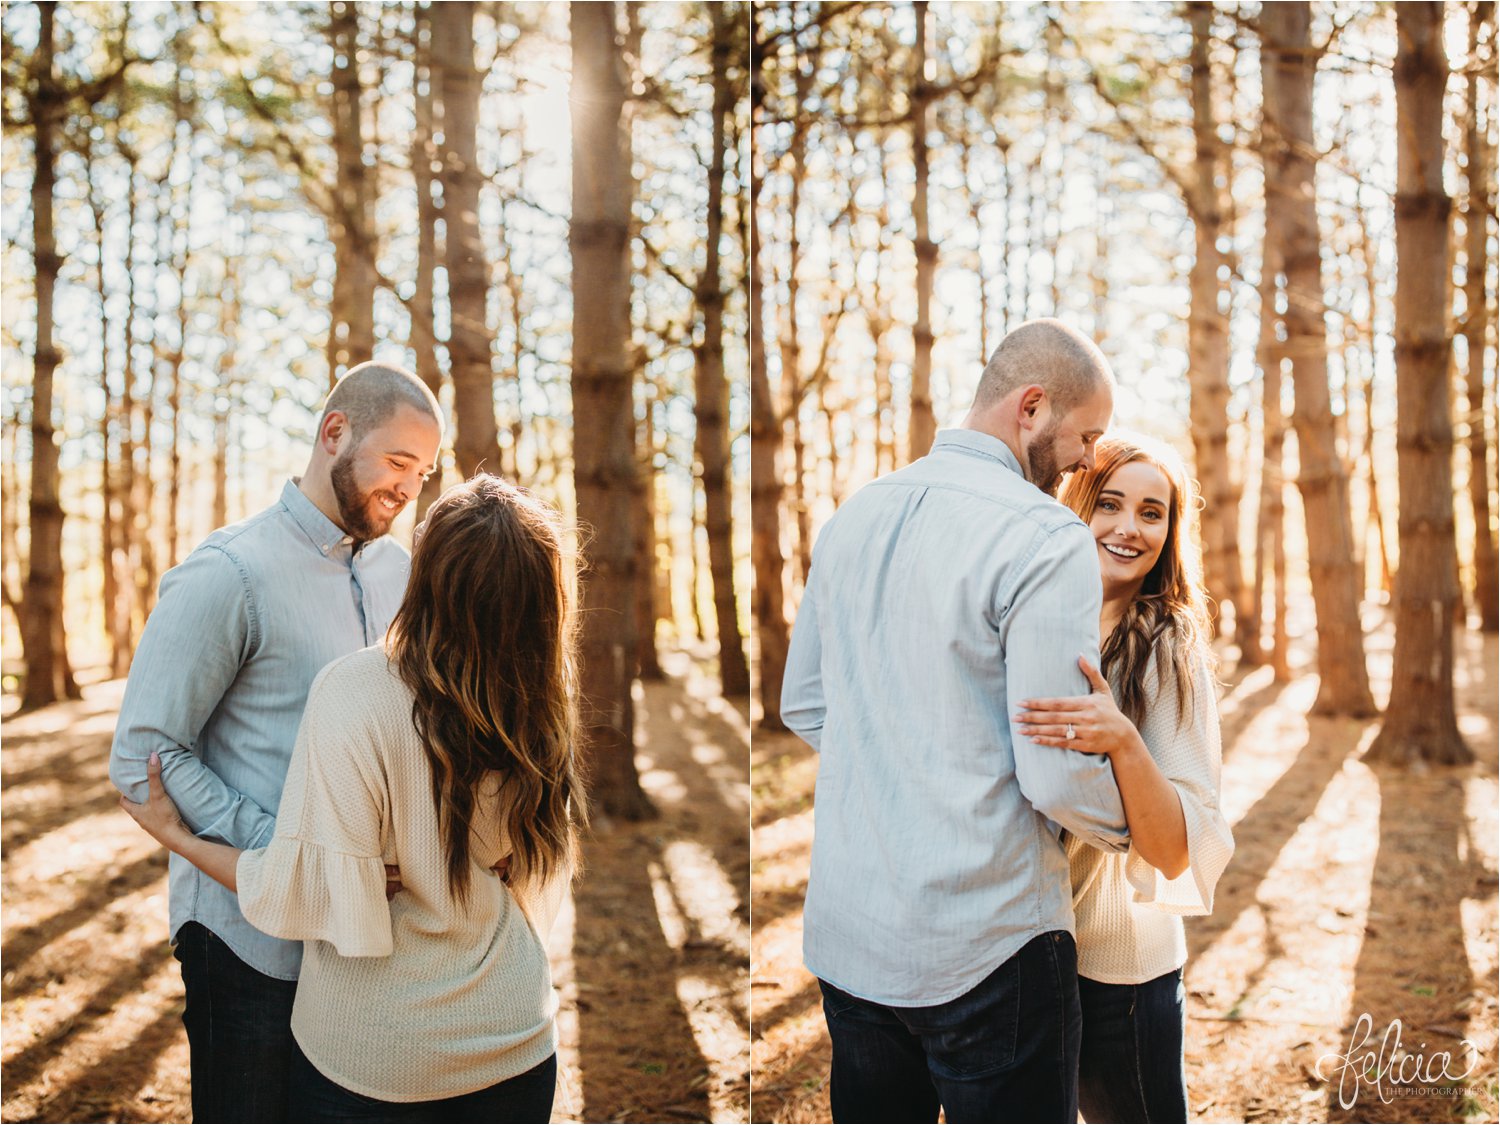 images by feliciathephotographer.com | The Forest | engagement photos | wedding photographer | engagement photographer | forest | sunrise | collage | two | tall trees | blue jeans | candid | posing | posed | smiling | laughter | laughing | 